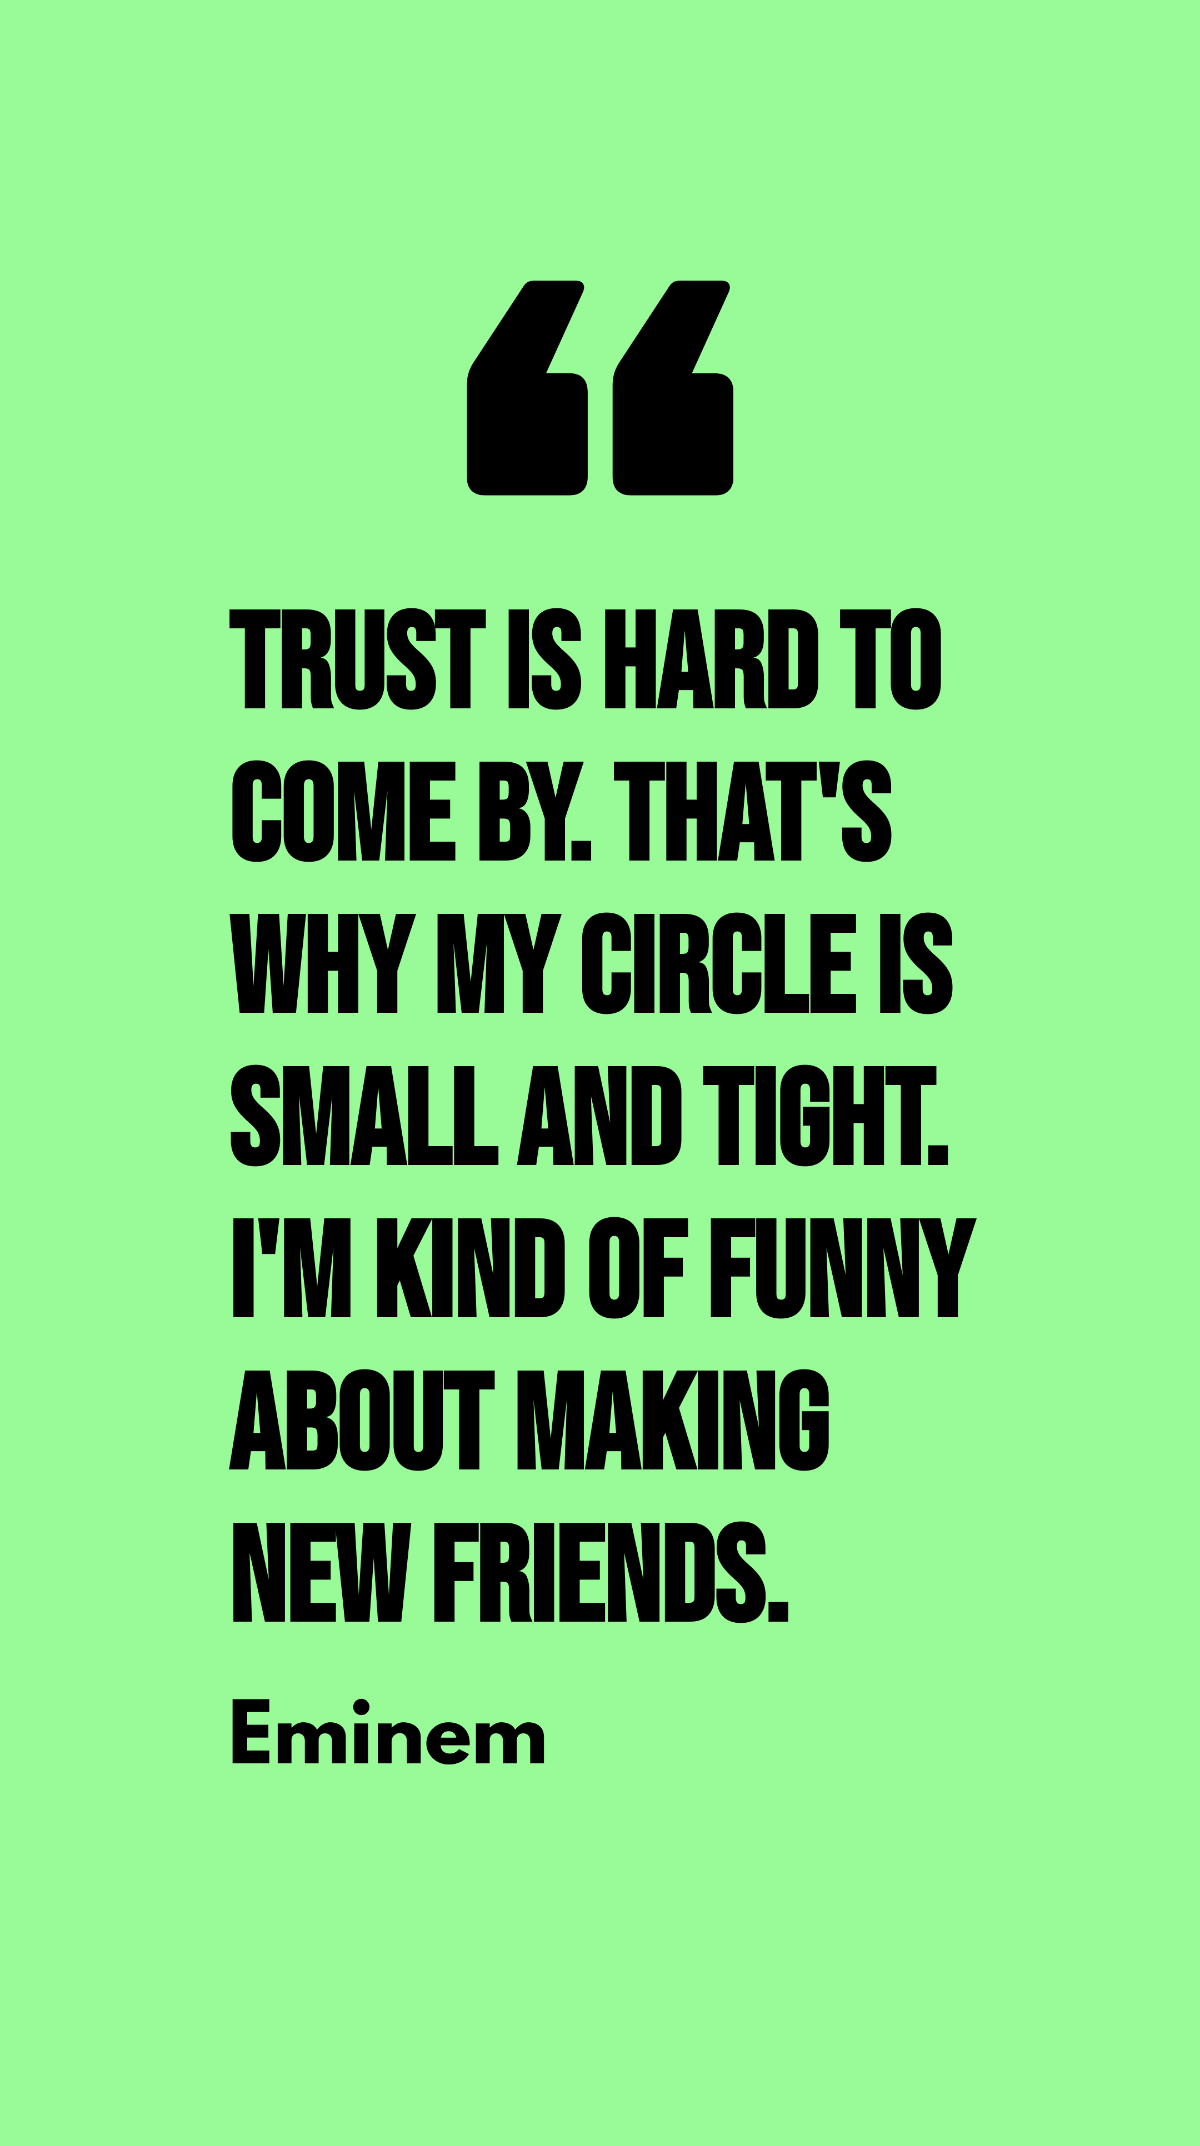 Eminem - Trust is hard to come by. That's why my circle is small and tight. I'm kind of funny about making new friends.